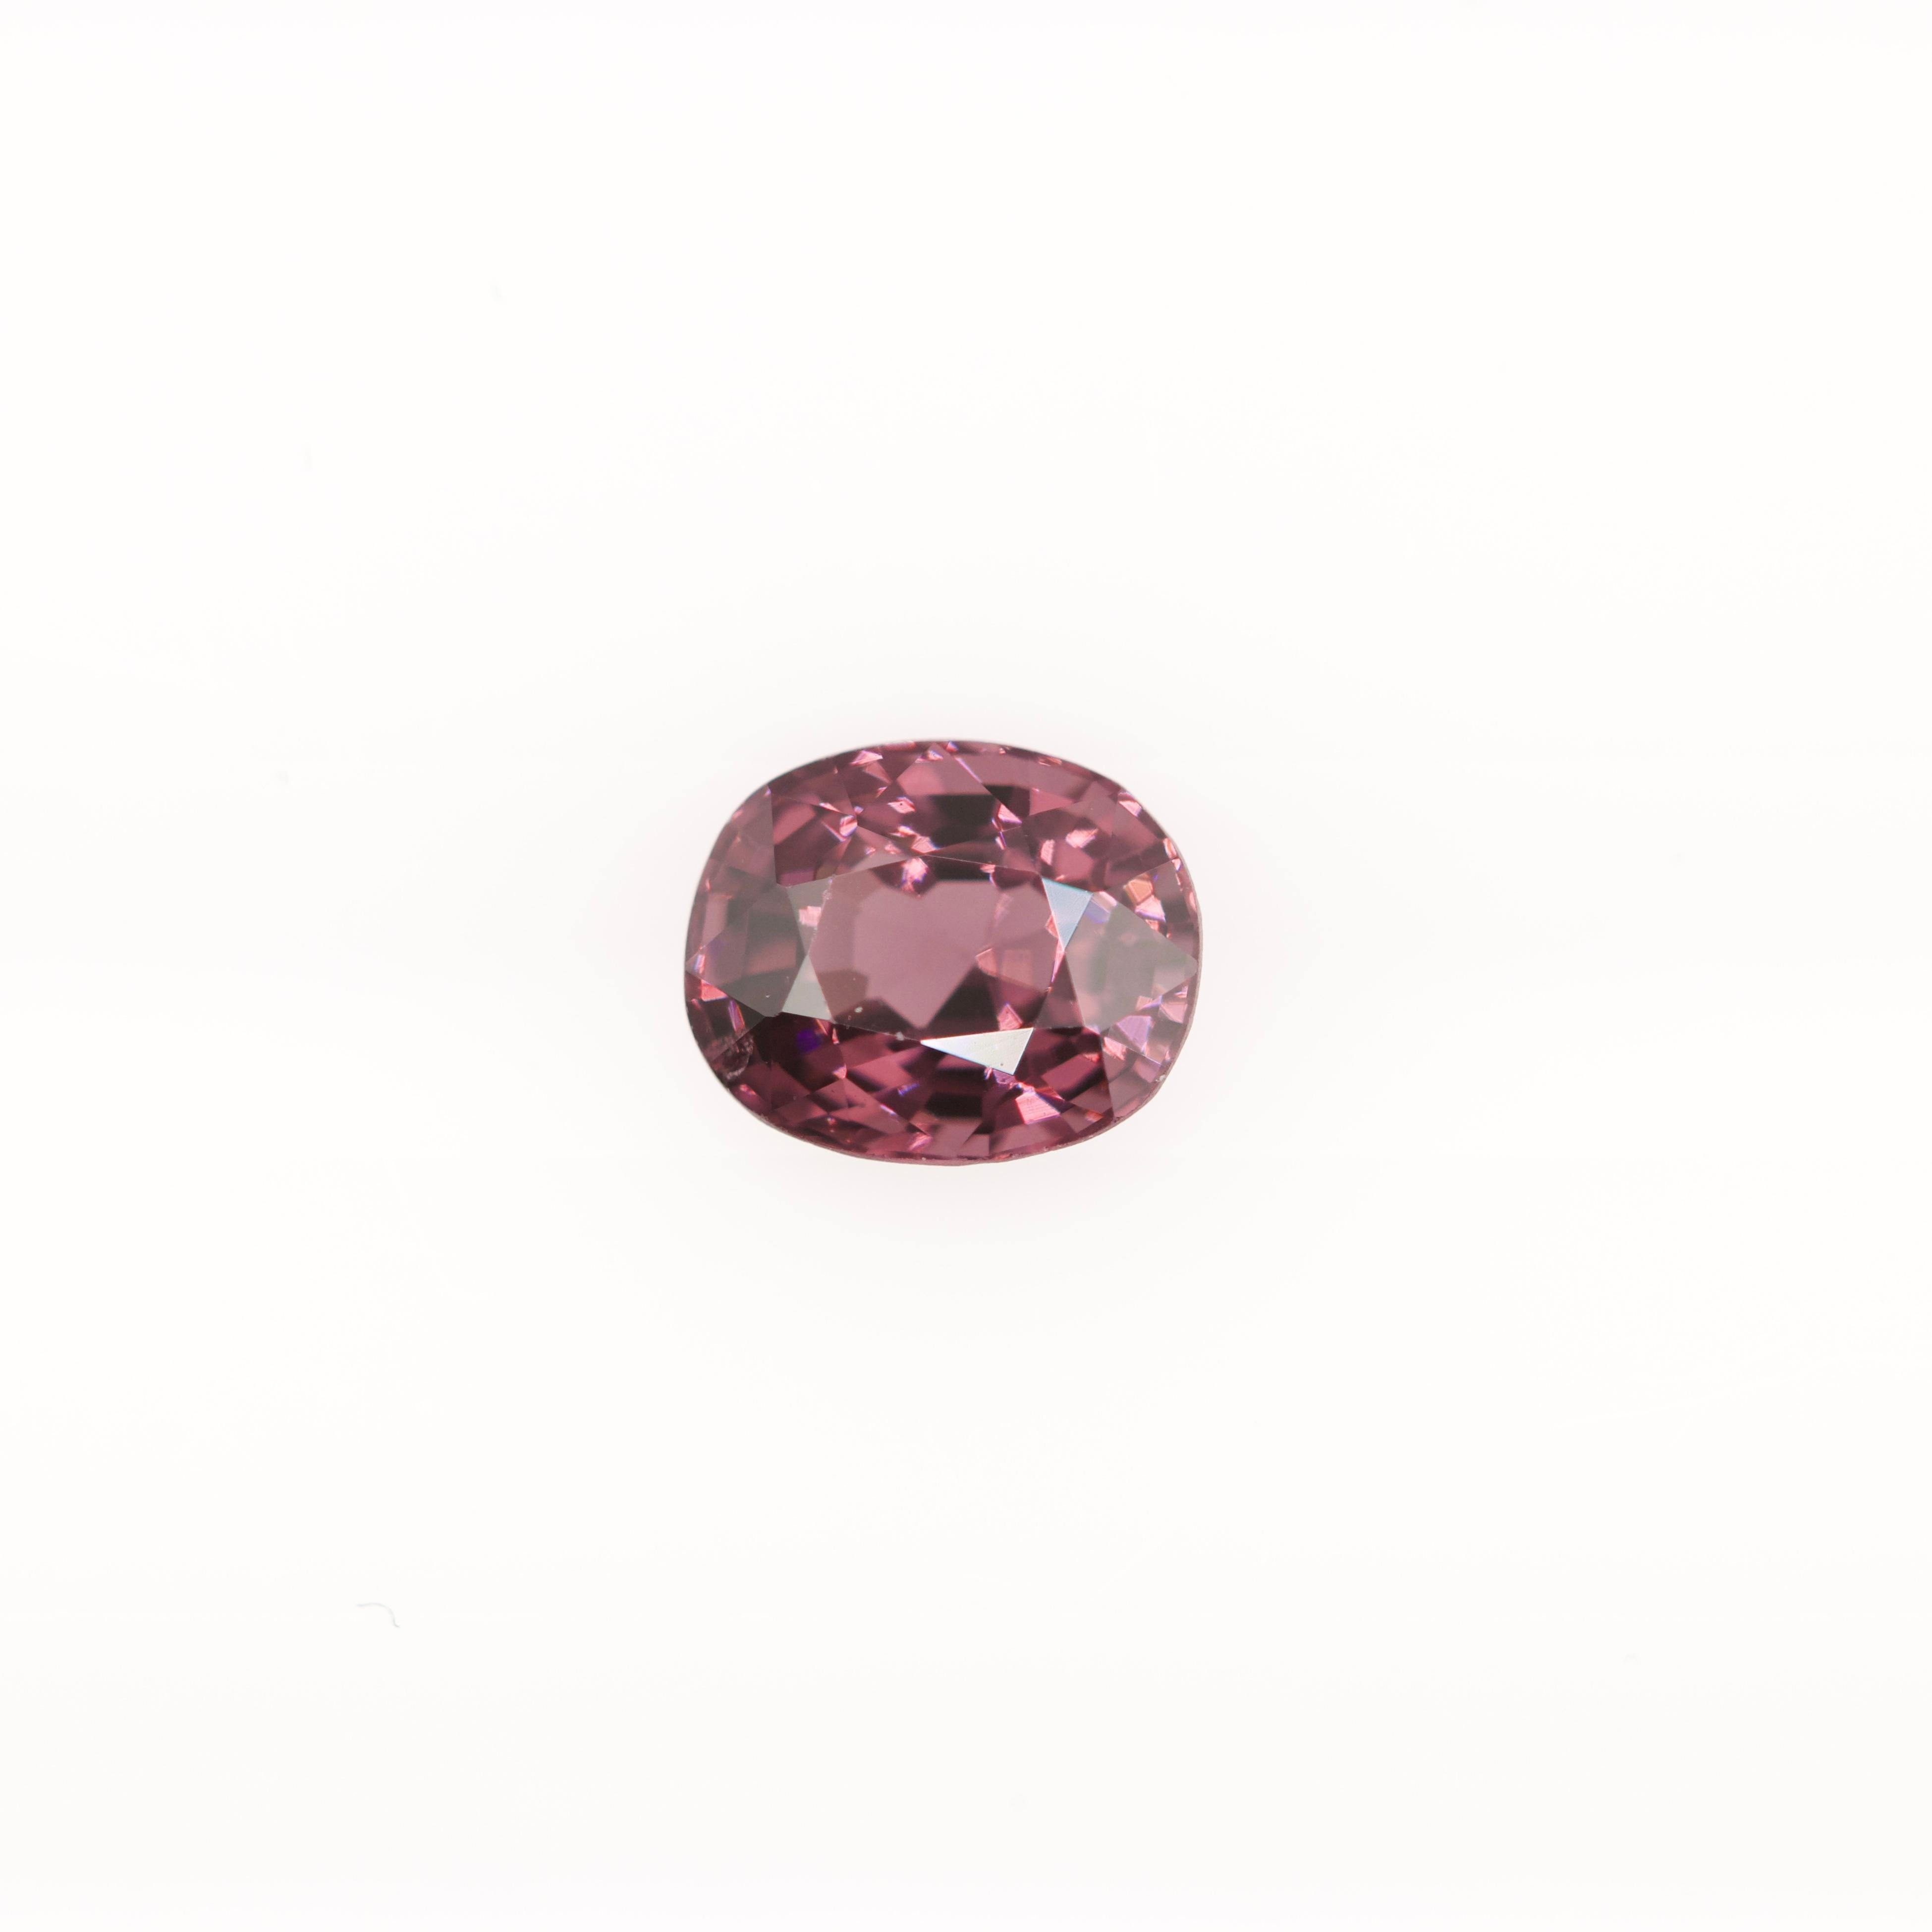 High quality precious gemstone.
We offer also personalised Made in Italy jewellery design using this gemstone.

• Dimensions: 6.60 x 5.54 x 4.12 mm
• Total carat weight: 1.13 carat
• Cut: Cushion
(PSP1A)

We offer complimentary gemological